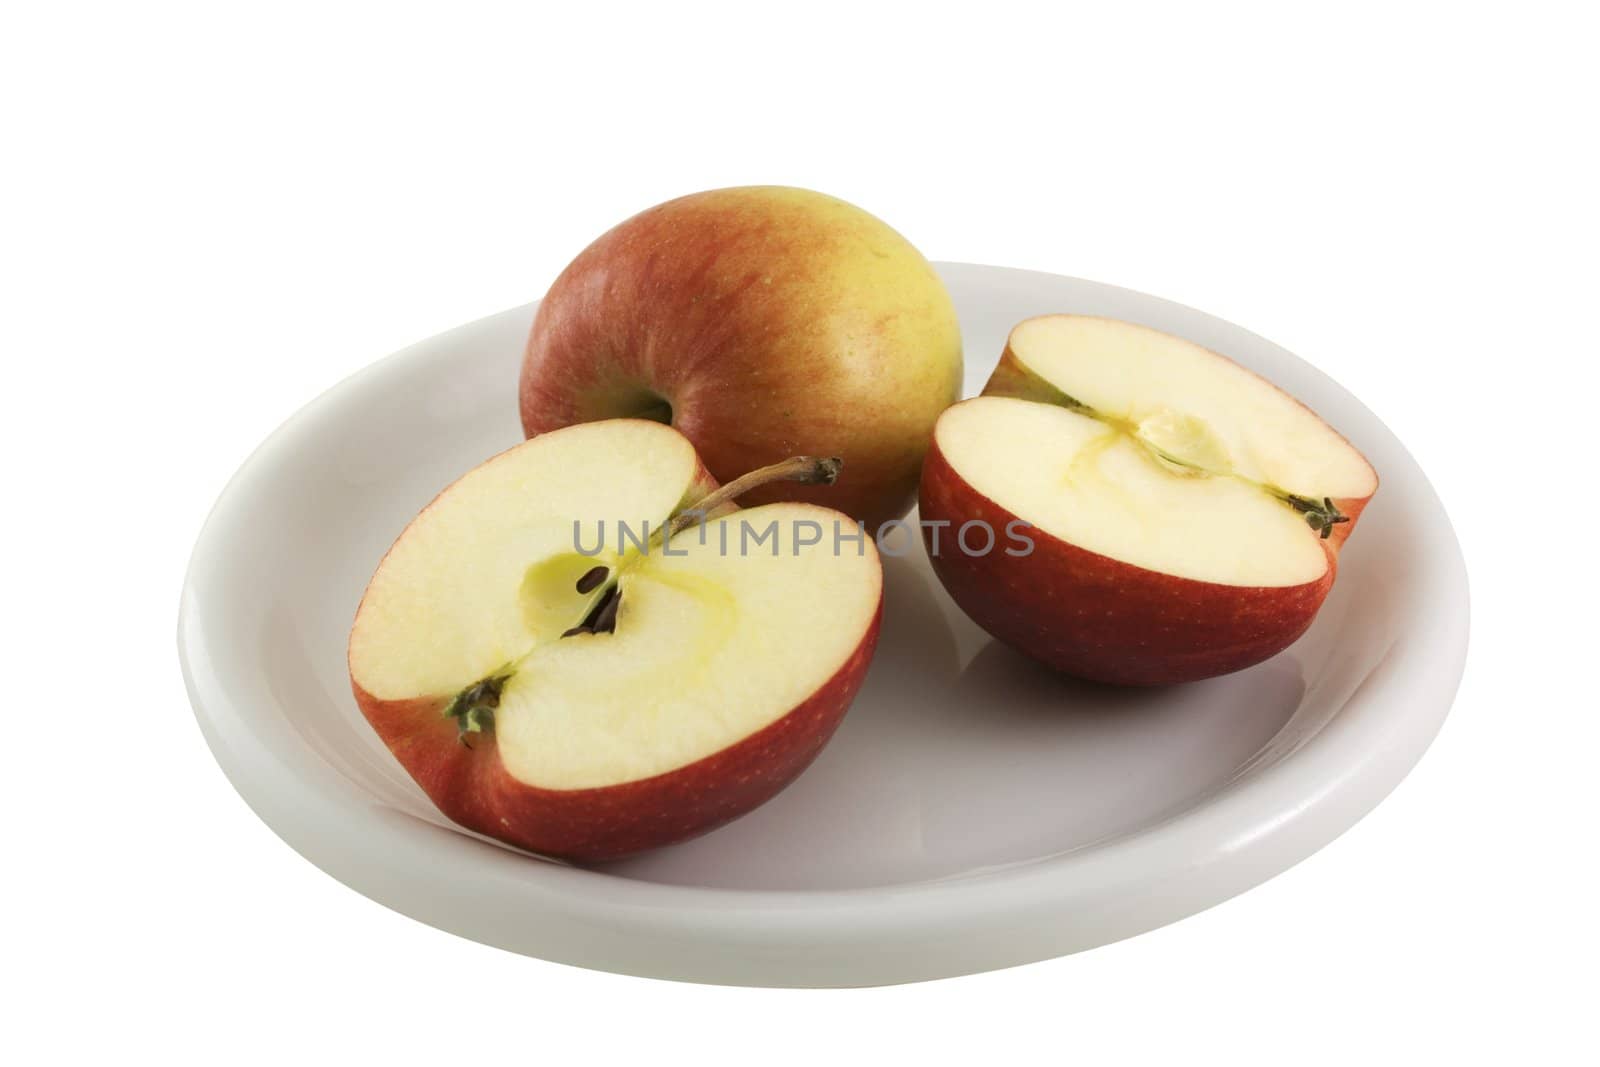 A plate with two apples on it, one cut and the other whole